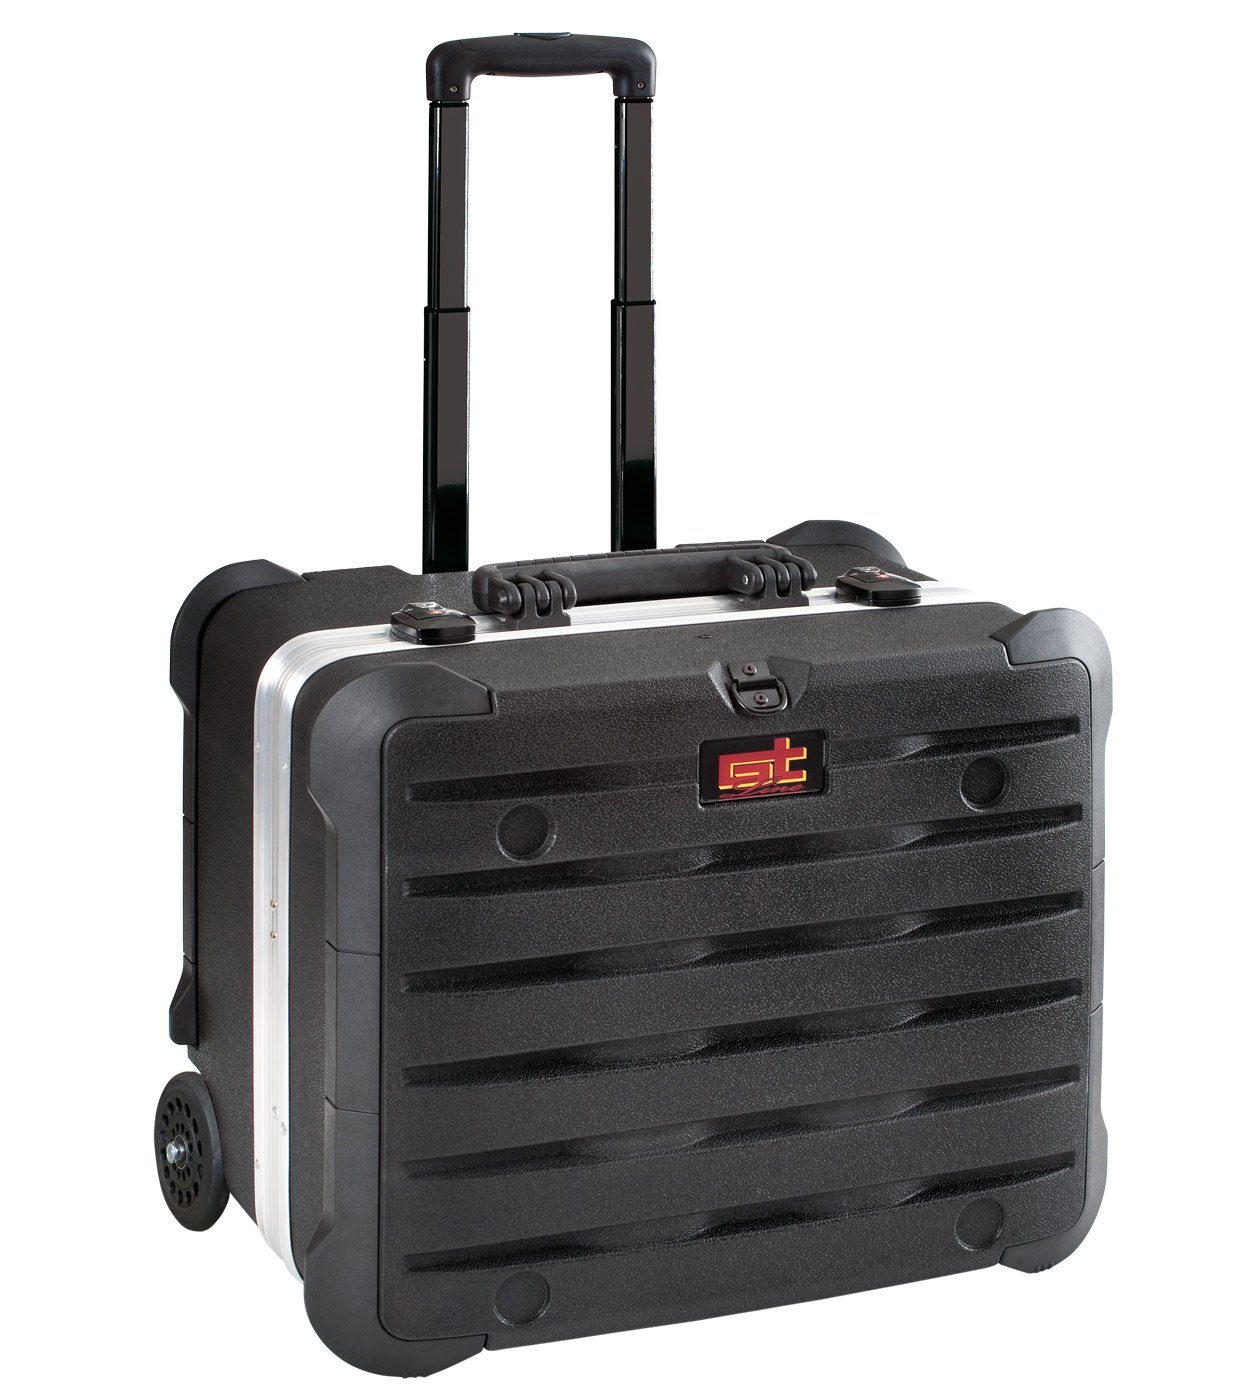 GT Line ROCK TURTLE PEL Professional Tool Trolley Case with integrated INTELLIRESPOND Technology